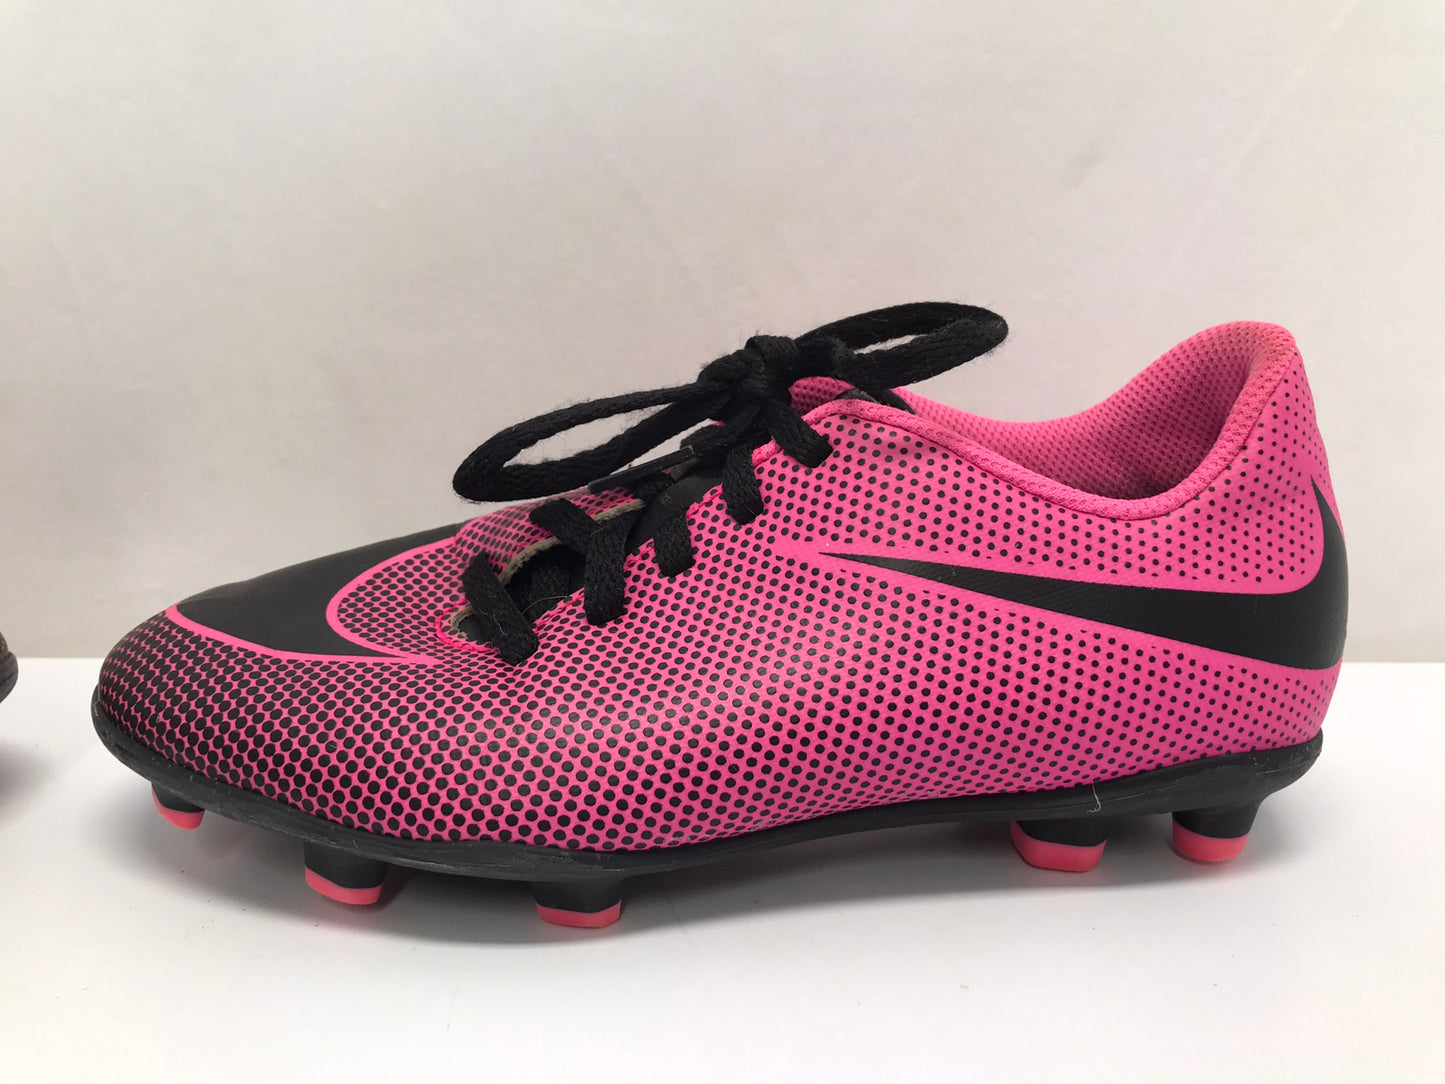 Soccer Shoes Cleats Child Size 2 Adidas Black Pink